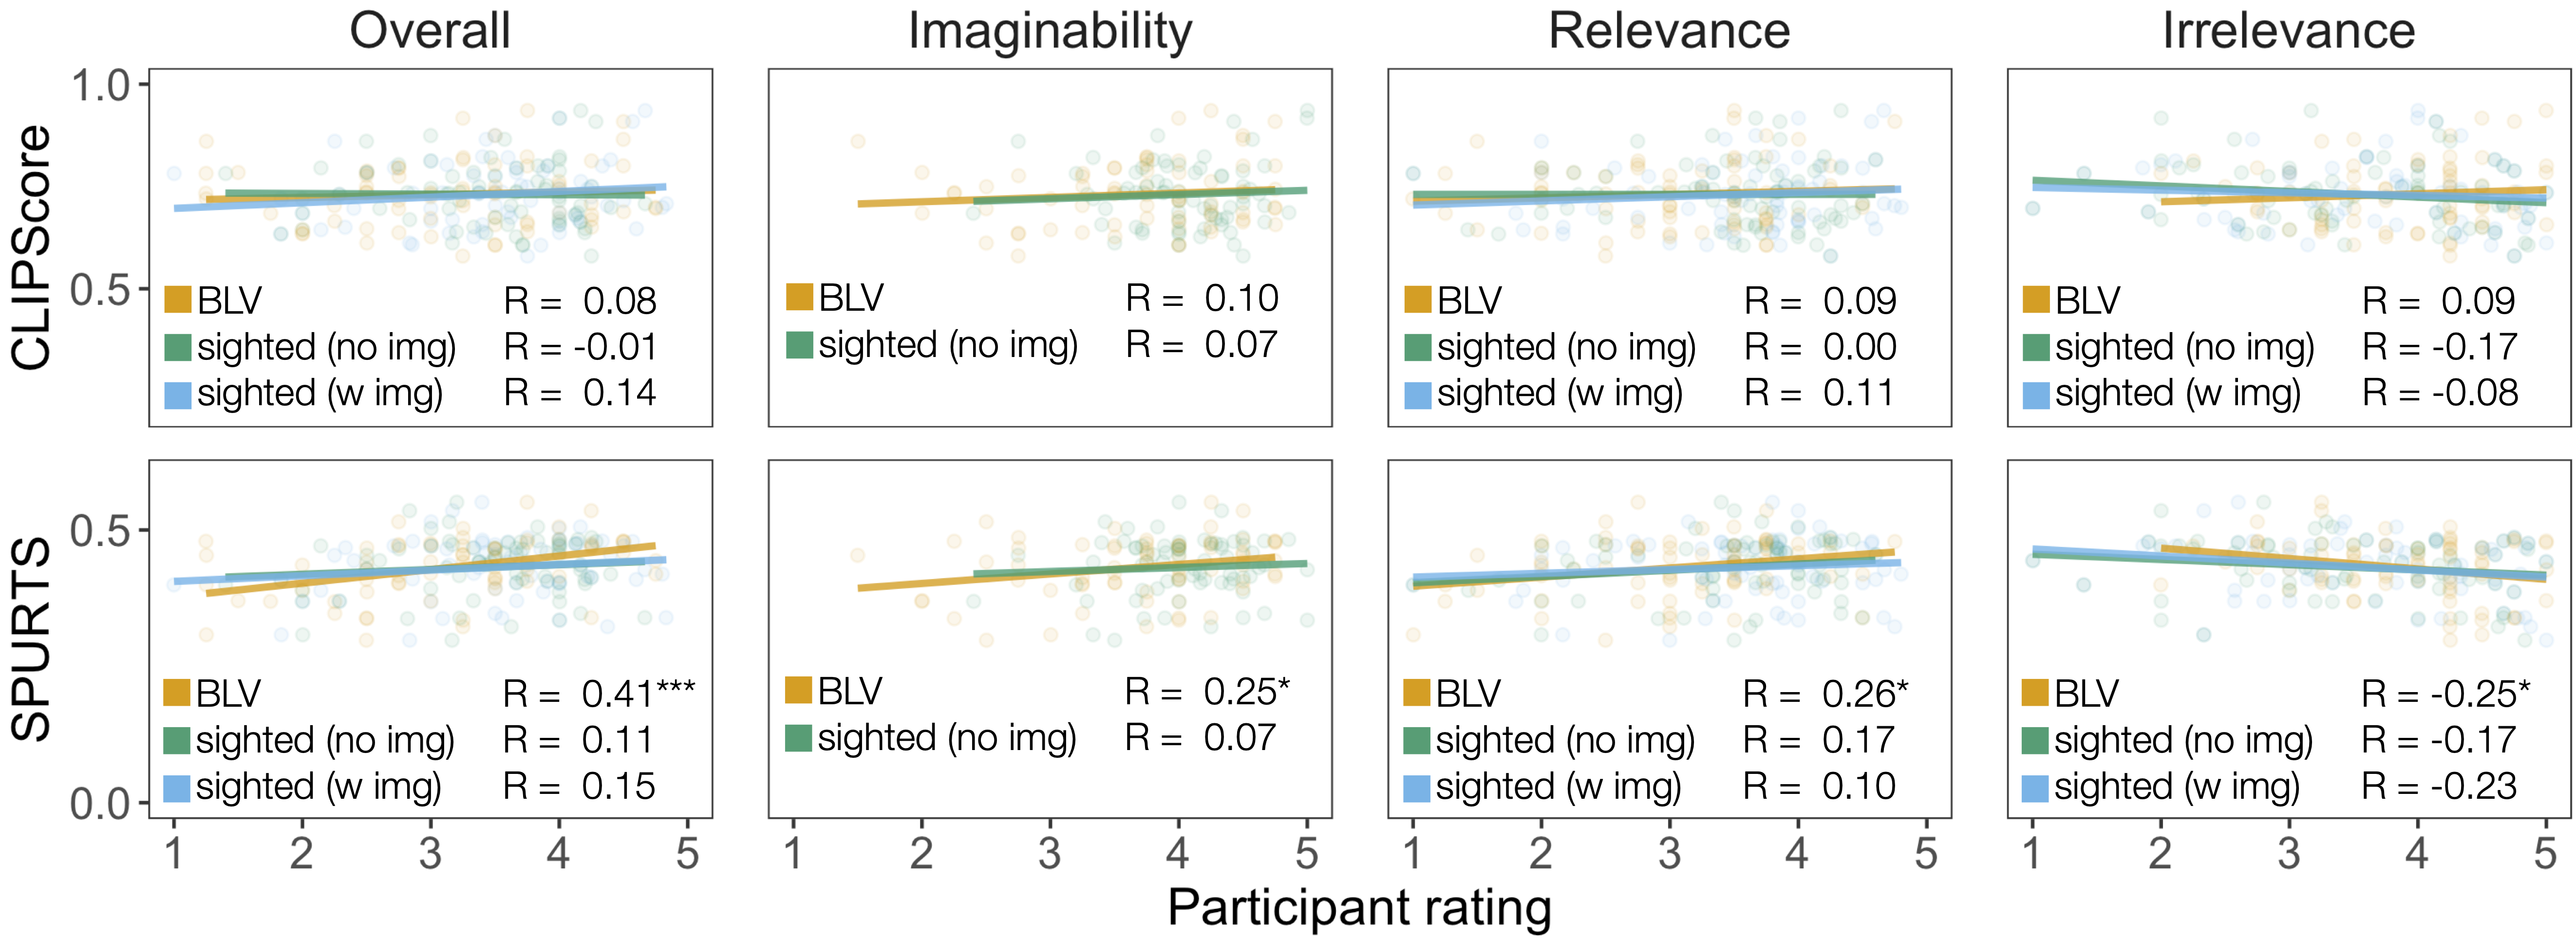 Plot with four subplots titled with the main contentquestions: Overall, Imaginability, Relevance, Irrelevance. Two rows divide the correlations between metrics: clipscore correlations are in the first row and SPURTS correlations are in the second. Each subplot shows that there is clearly no correlation between Clipscore and human ratings (BLV and sighted) across questions. CLIPScore correlations range from 0.14 to -0.2, and are never statistically significant. For SPURTS, there are no correlations with sighted ratings but significant positive correlations with the BLV ratings (up to a correlation of 0.41 with the overall ratings). Using SPURTS, the correlations for Irrelevance are all negative.